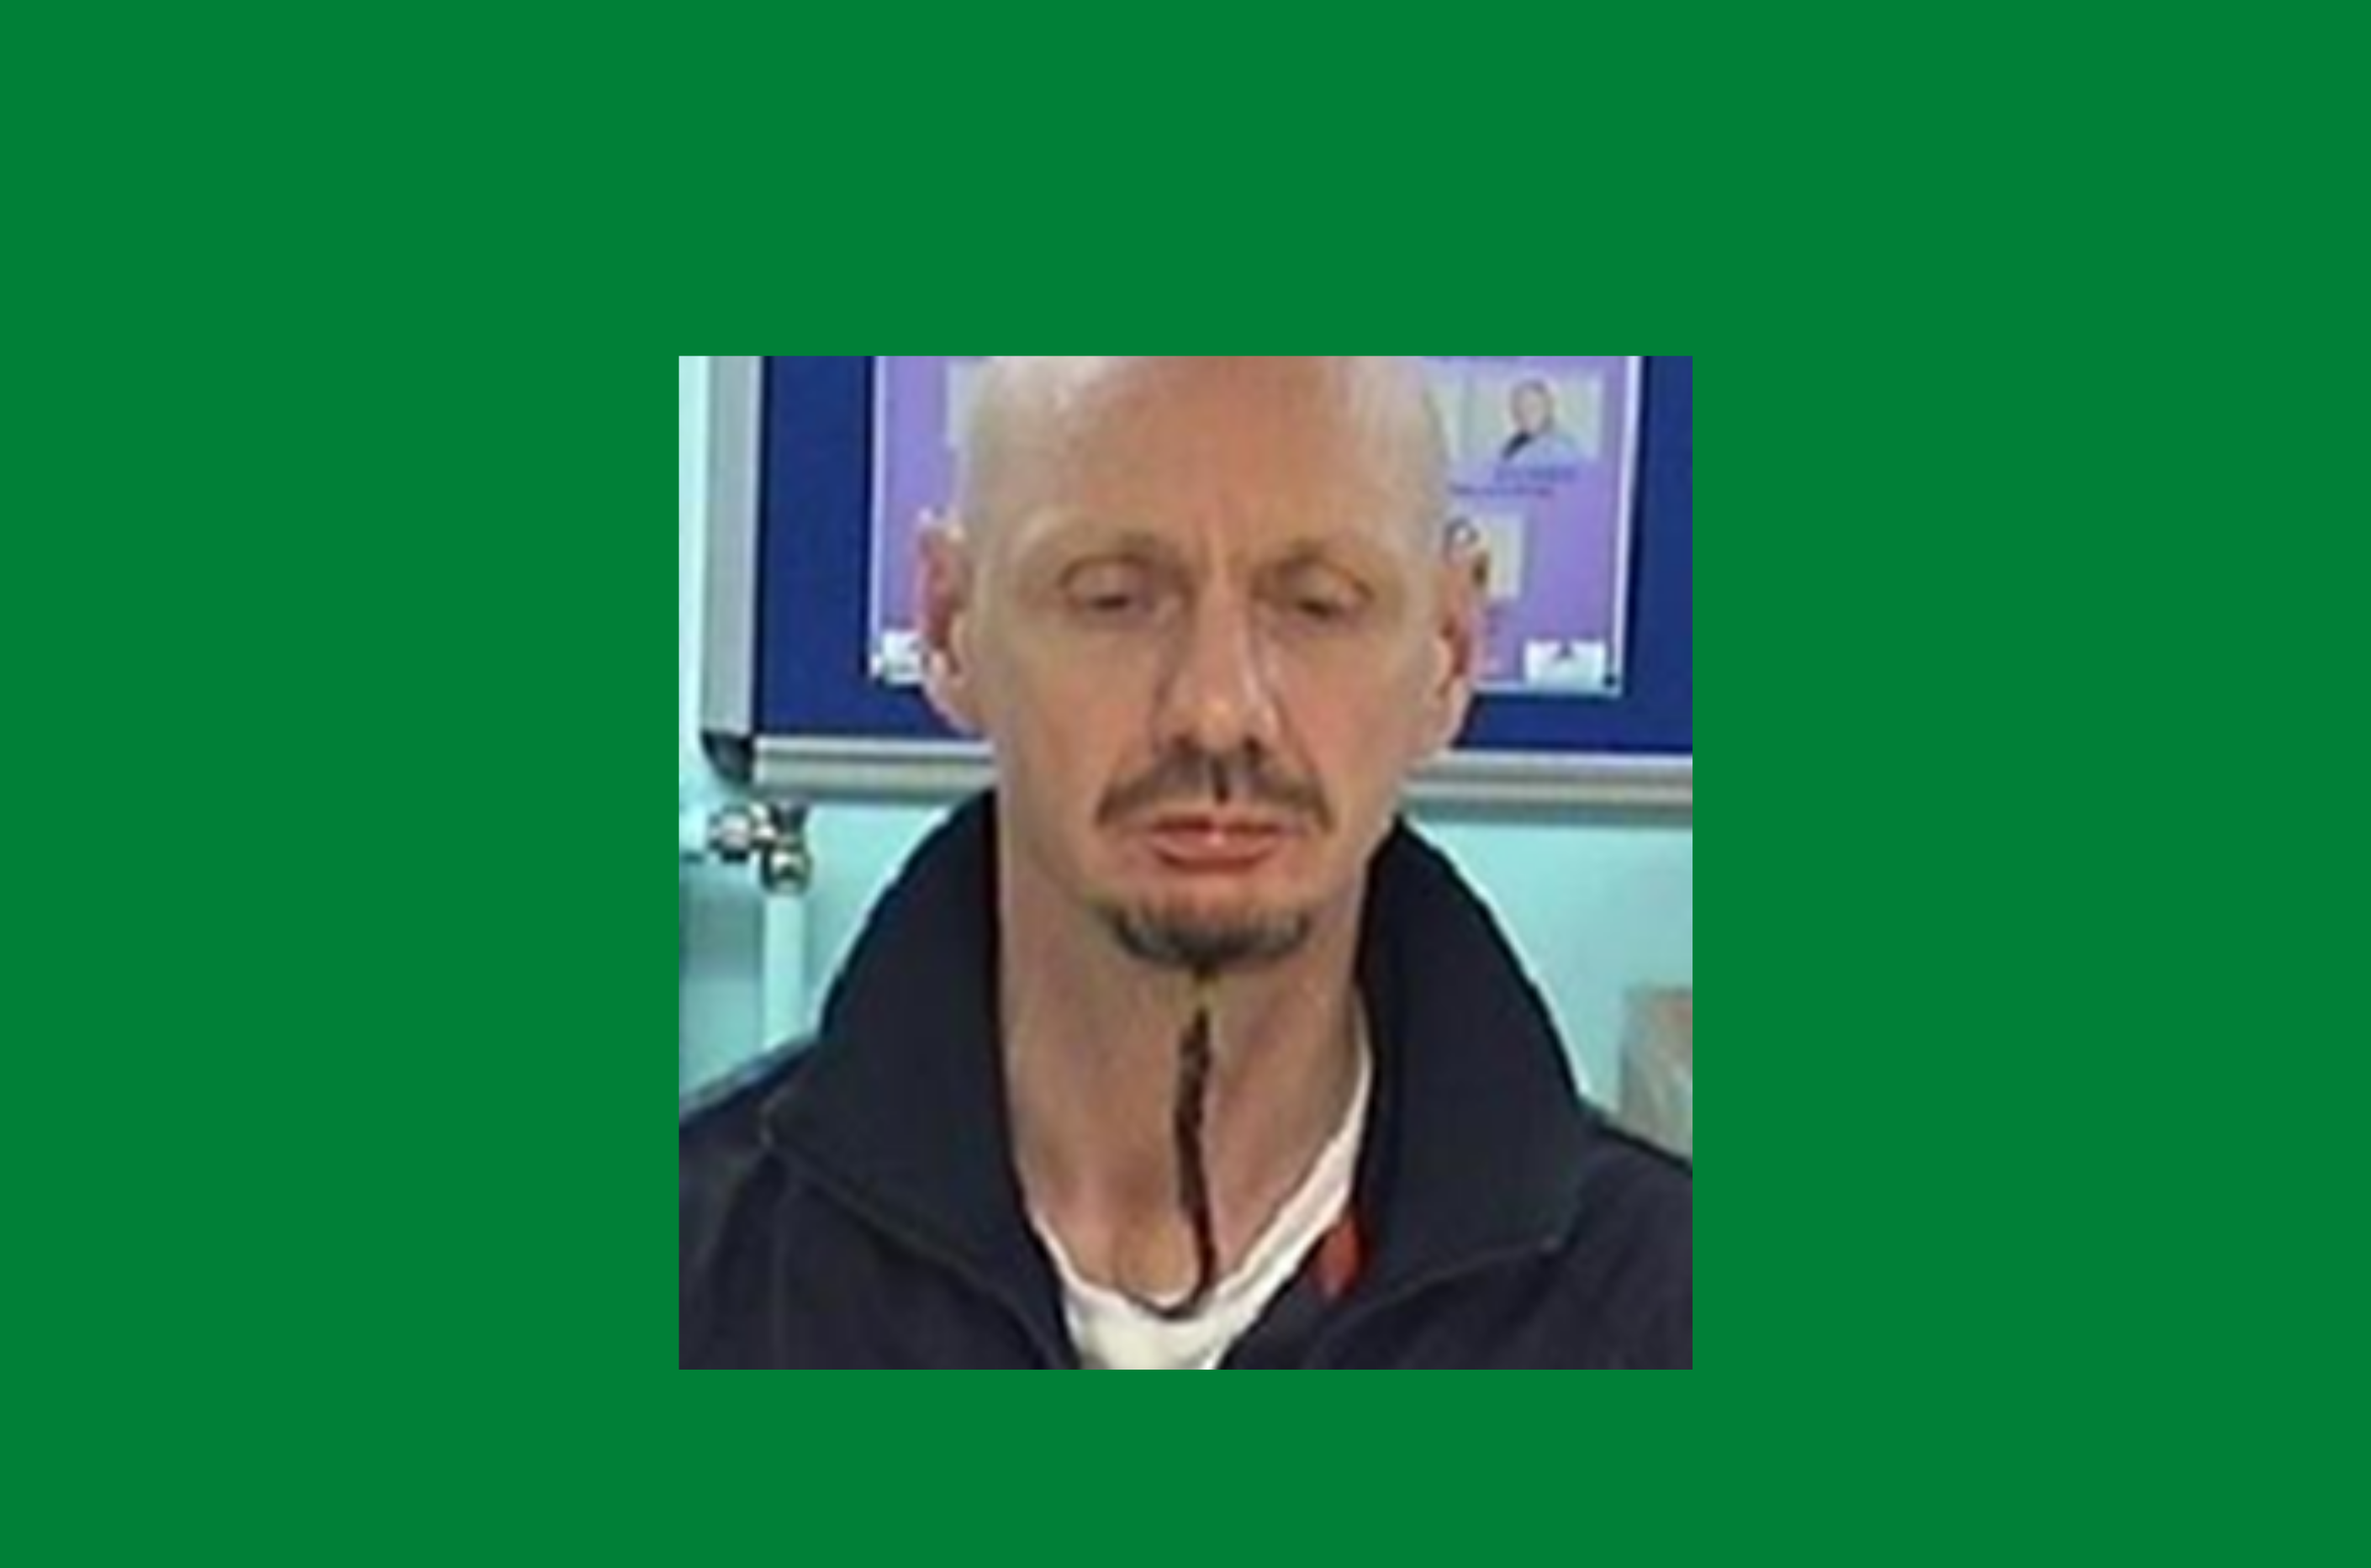 NEWS | Police urgently searching for sex offender who escaped from prison and is a danger to women and young children